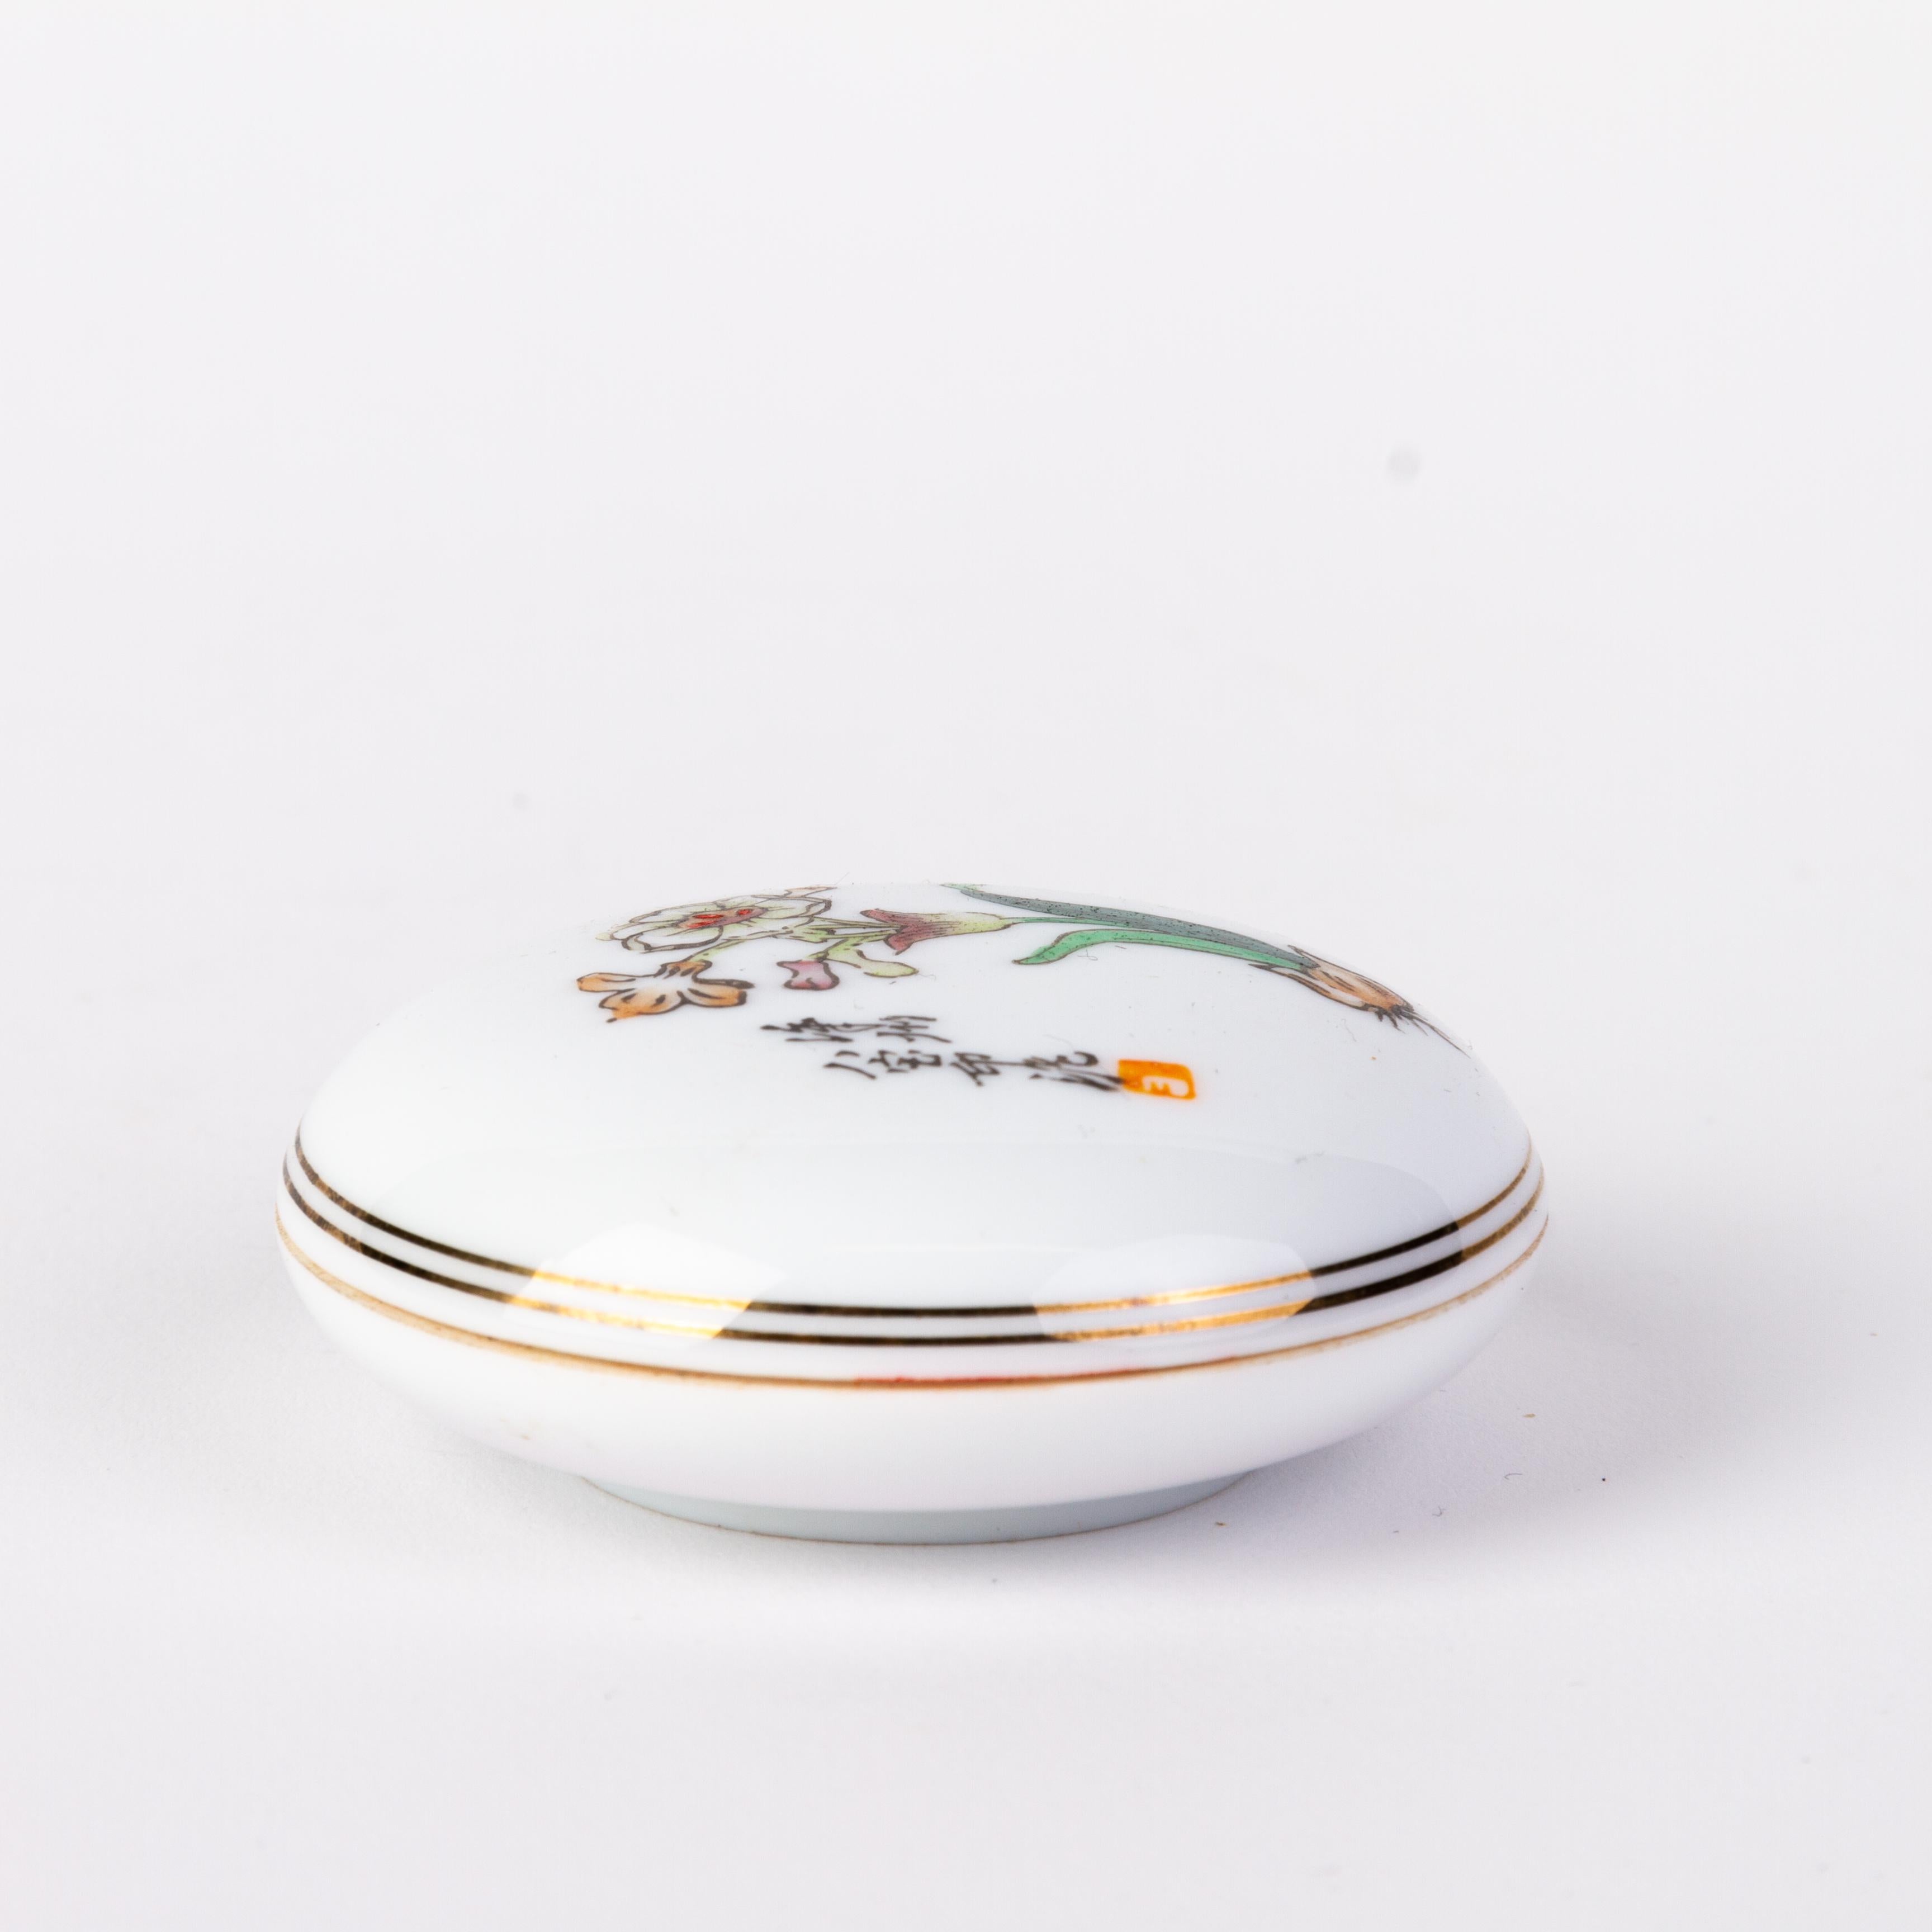 Signed Chinese Republic Period Porcelain Box with Seal 20th Century
Good condition 
From a private collection.
Free international shipping.